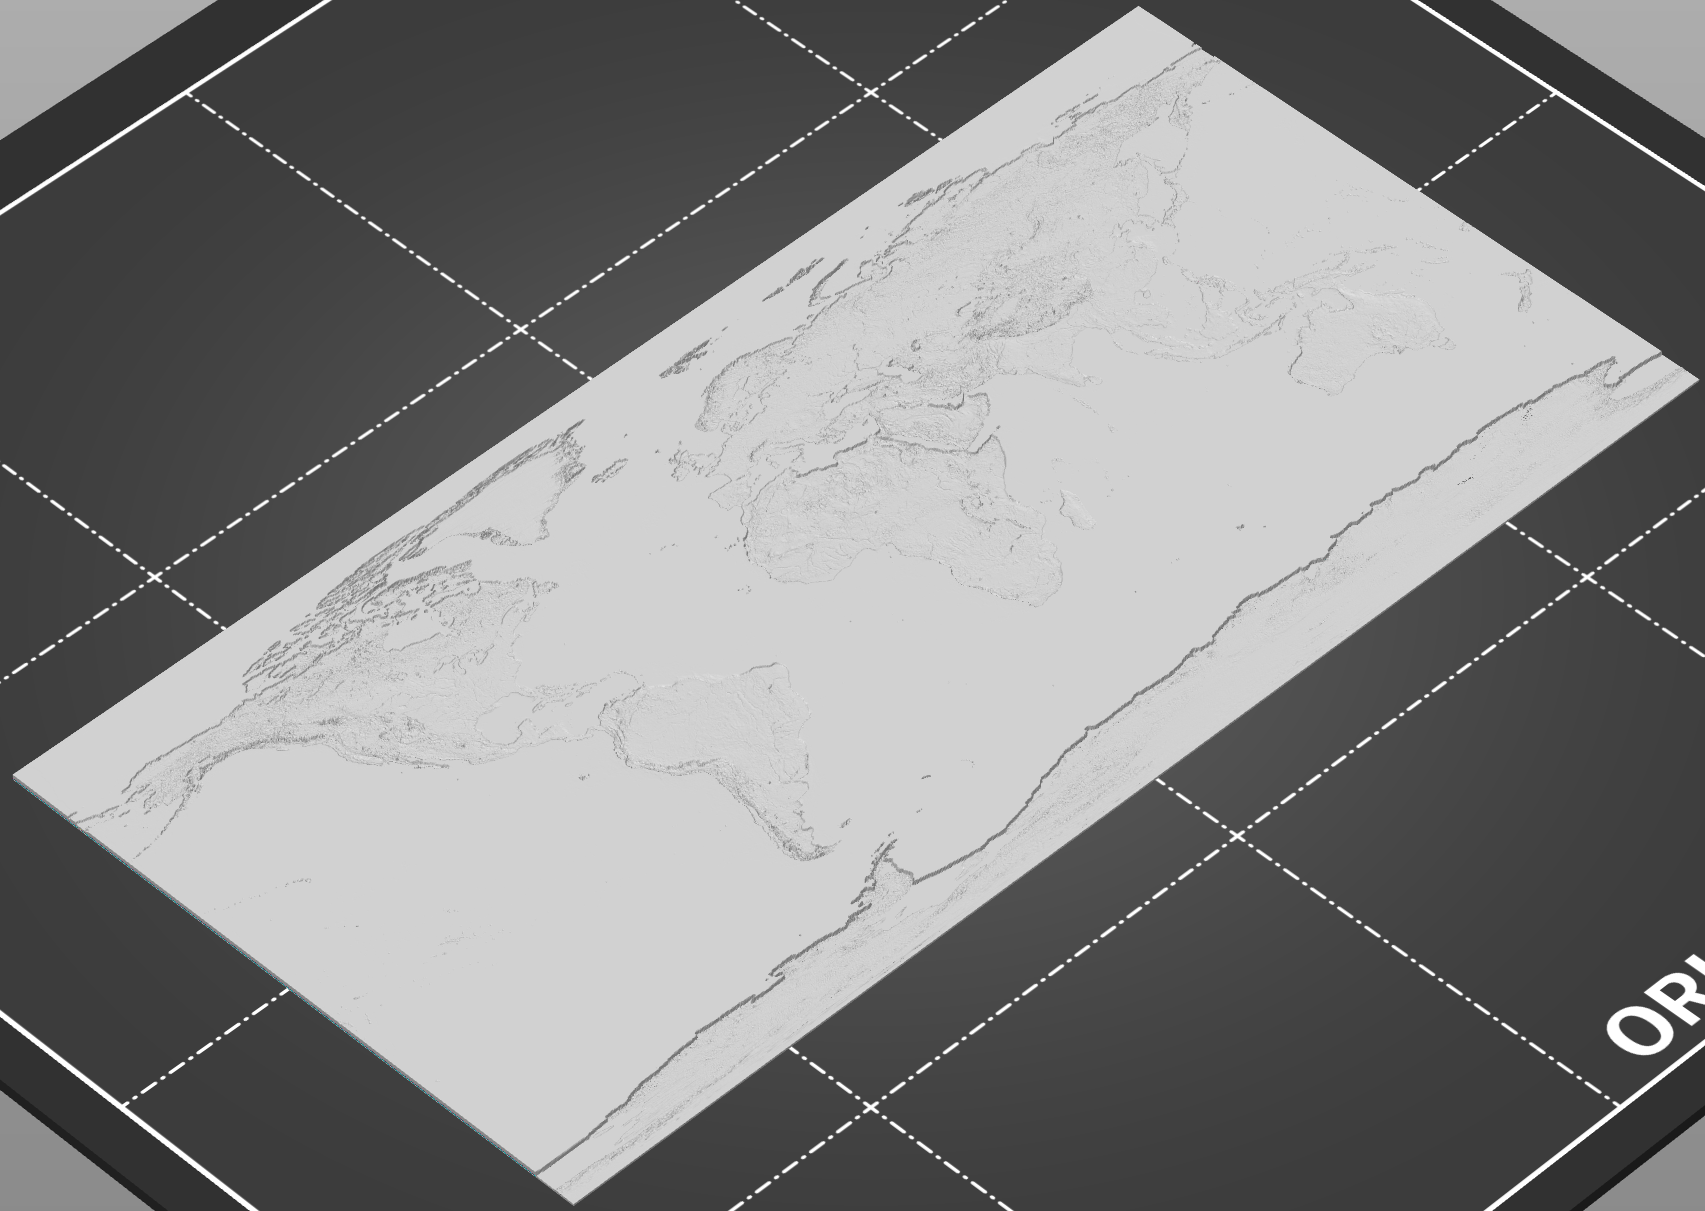 Colored lithophane of the world